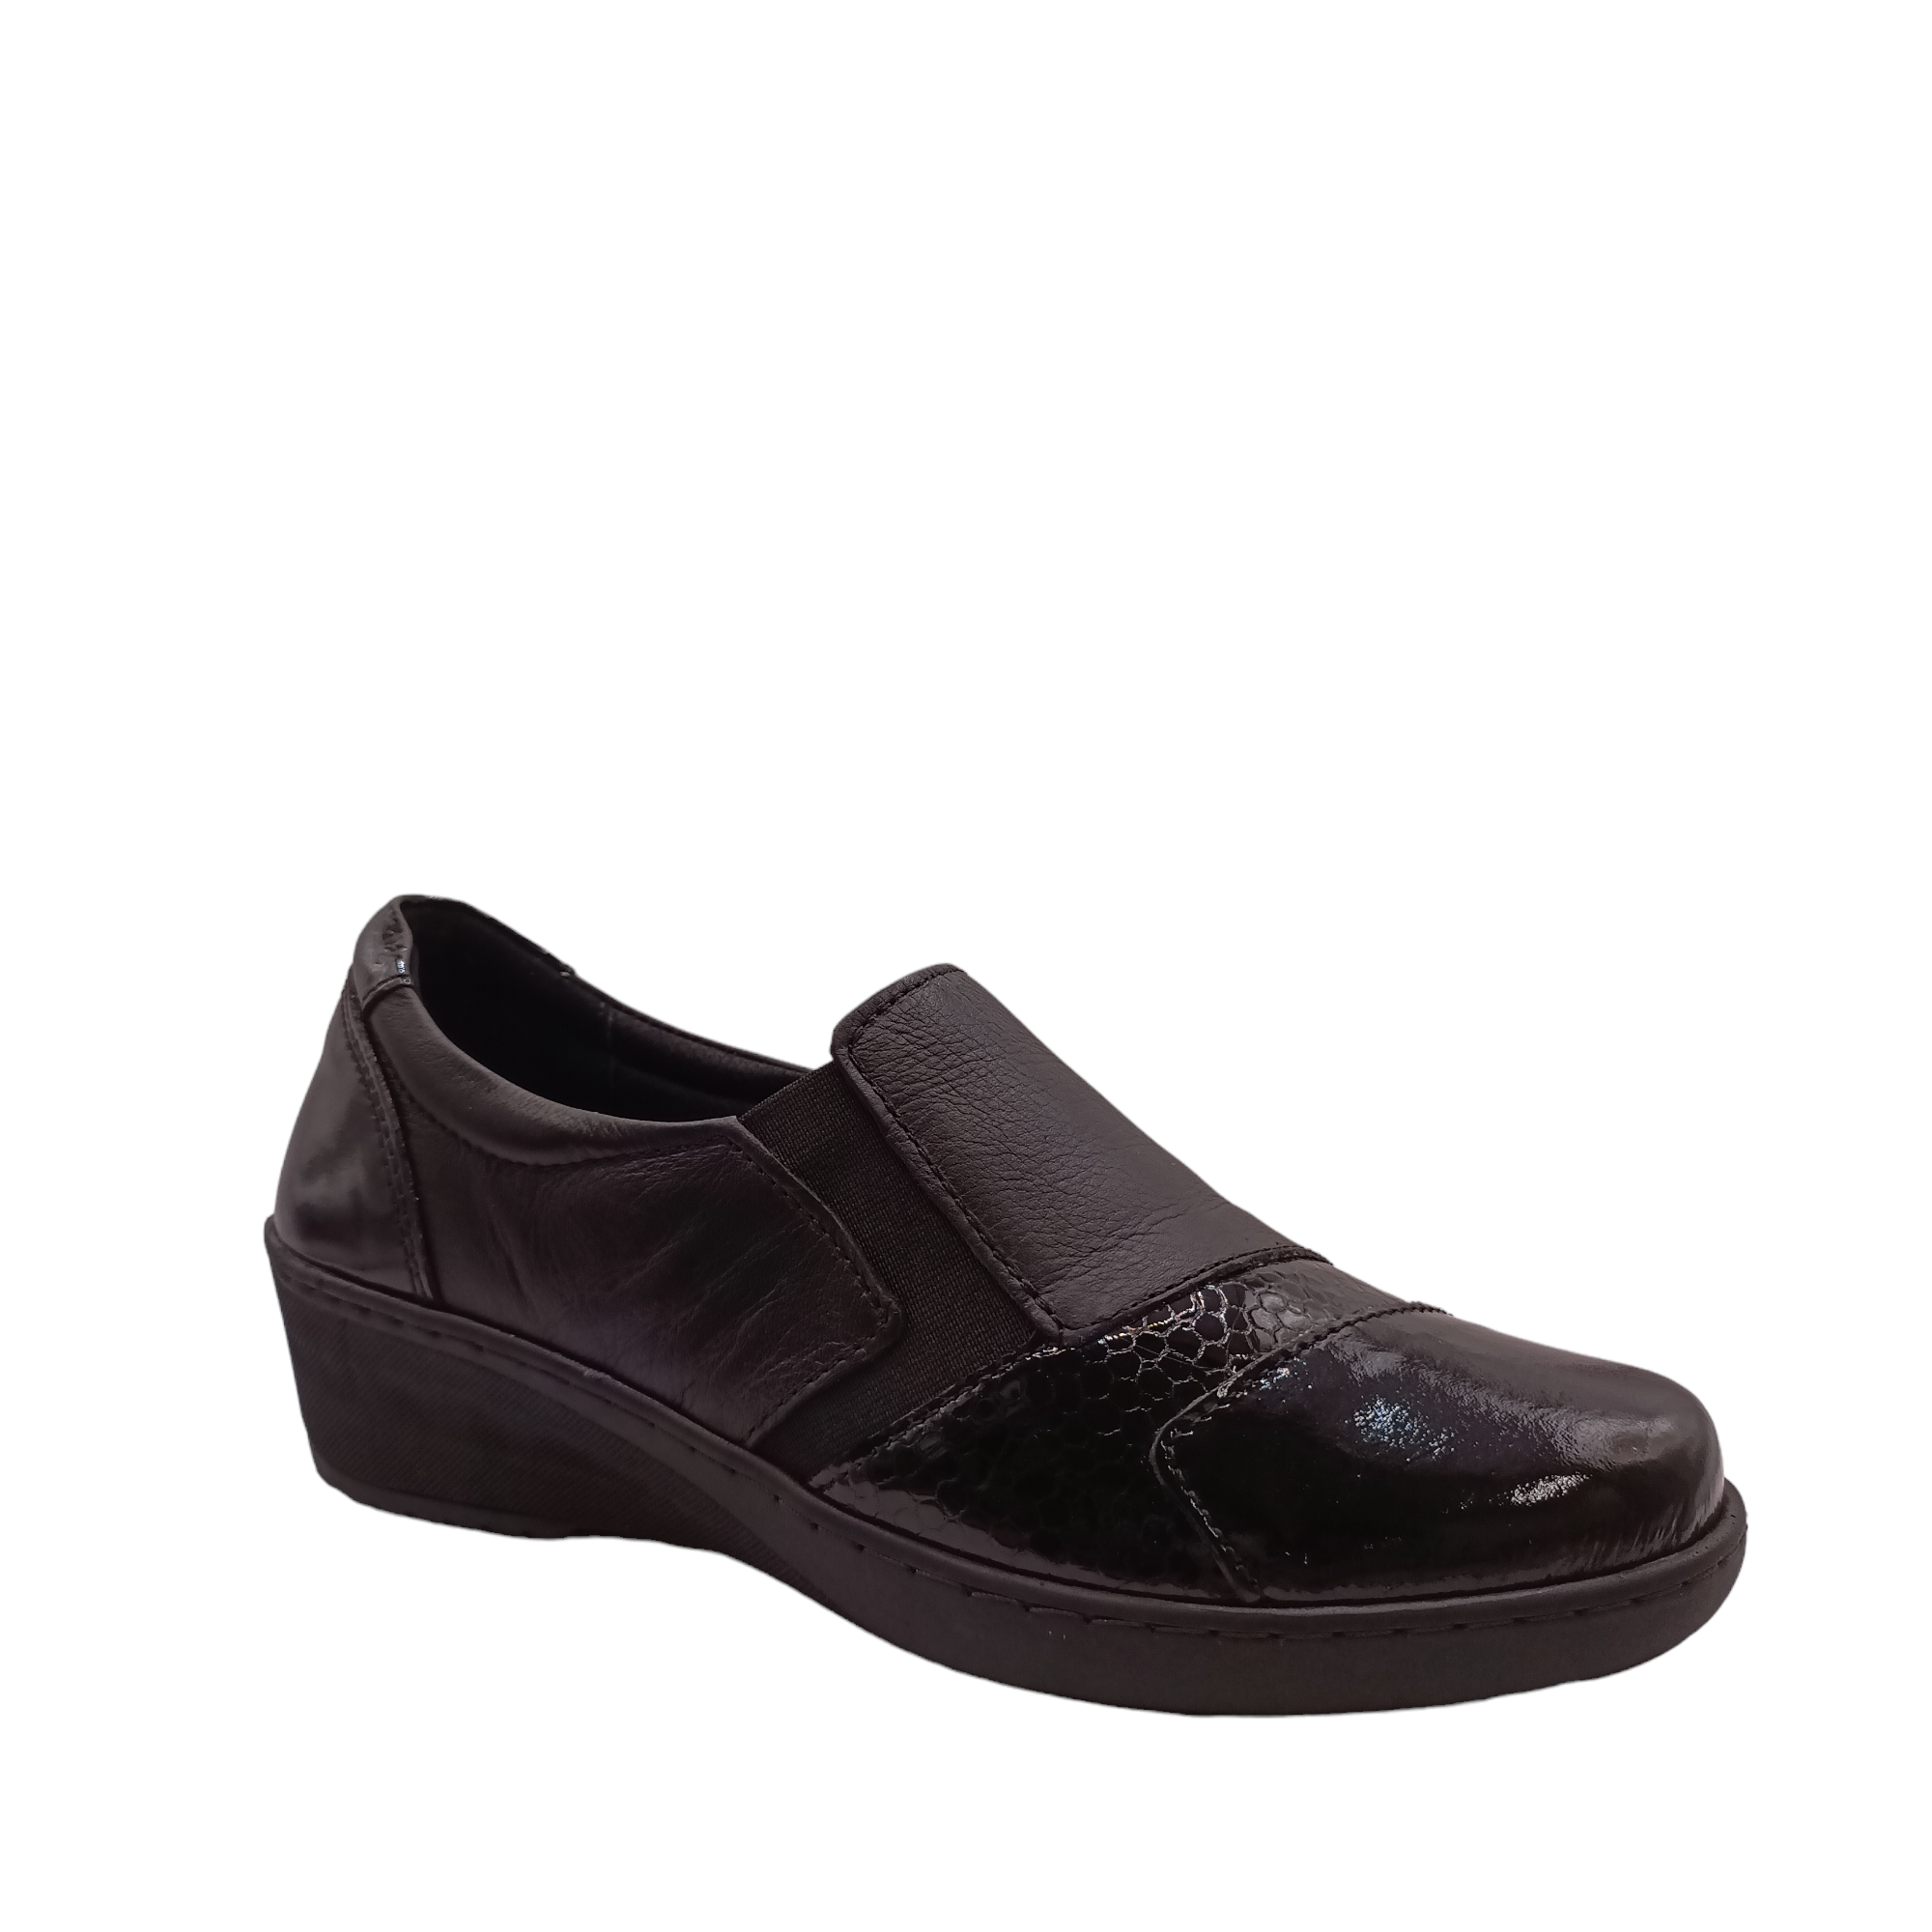 Shop CP461-18 Cabello - with shoe&amp;me - from Cabello - Shoes - Shoe, Winter, Womens - [collection]